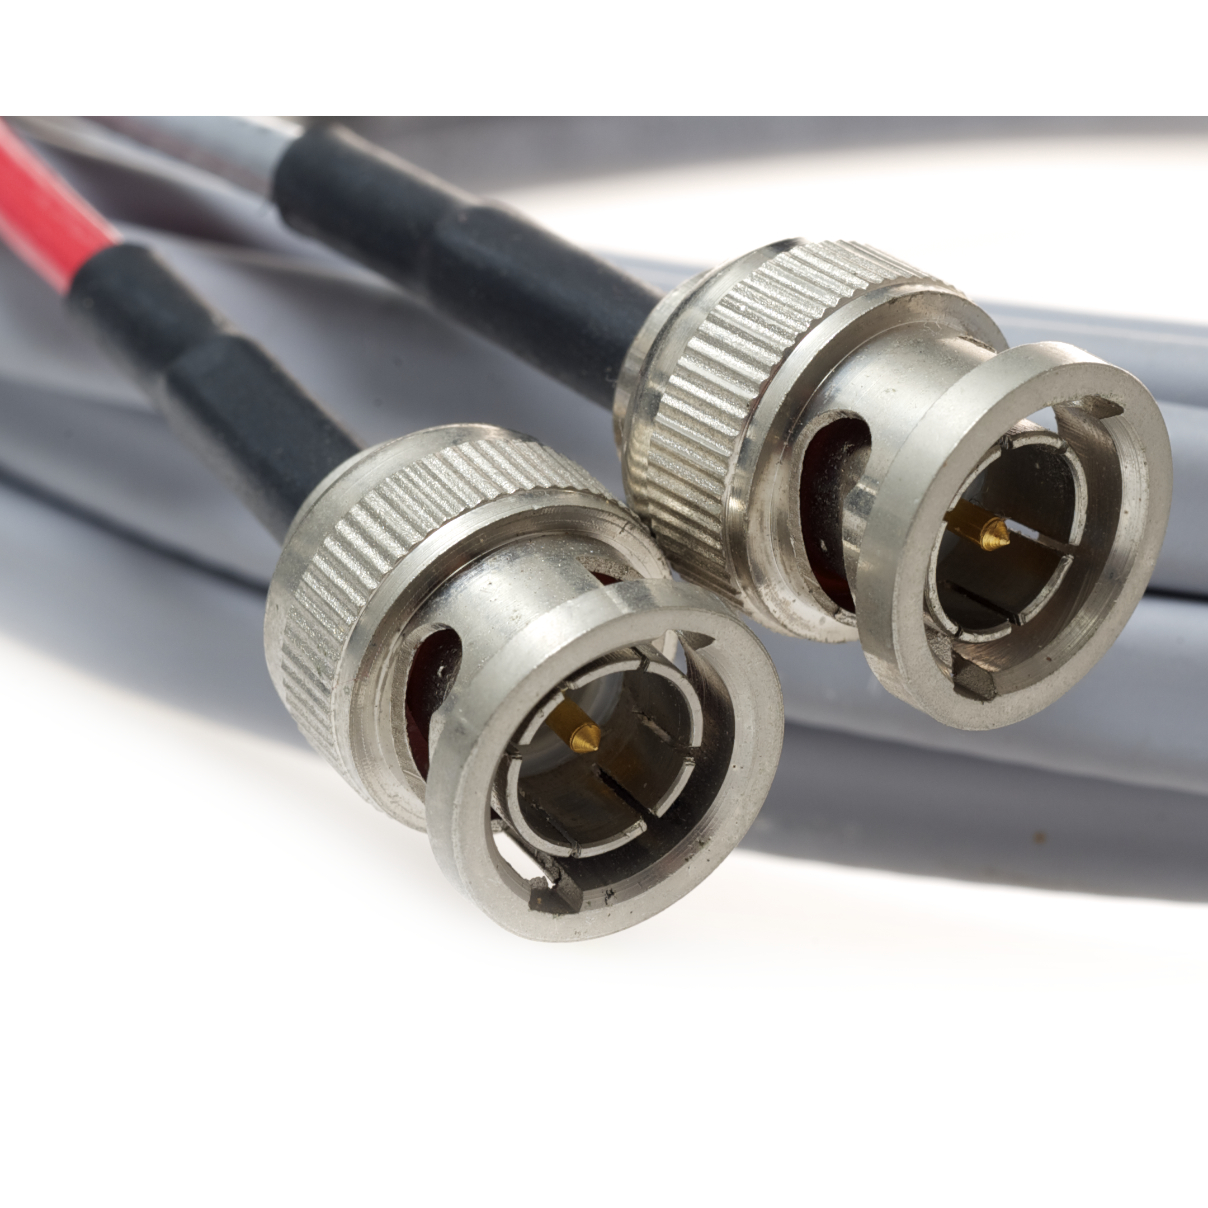 1 Feet DS3 735a Plenum  Coaxial Cable with Dual BNC 75 Ohm -  26 Awg